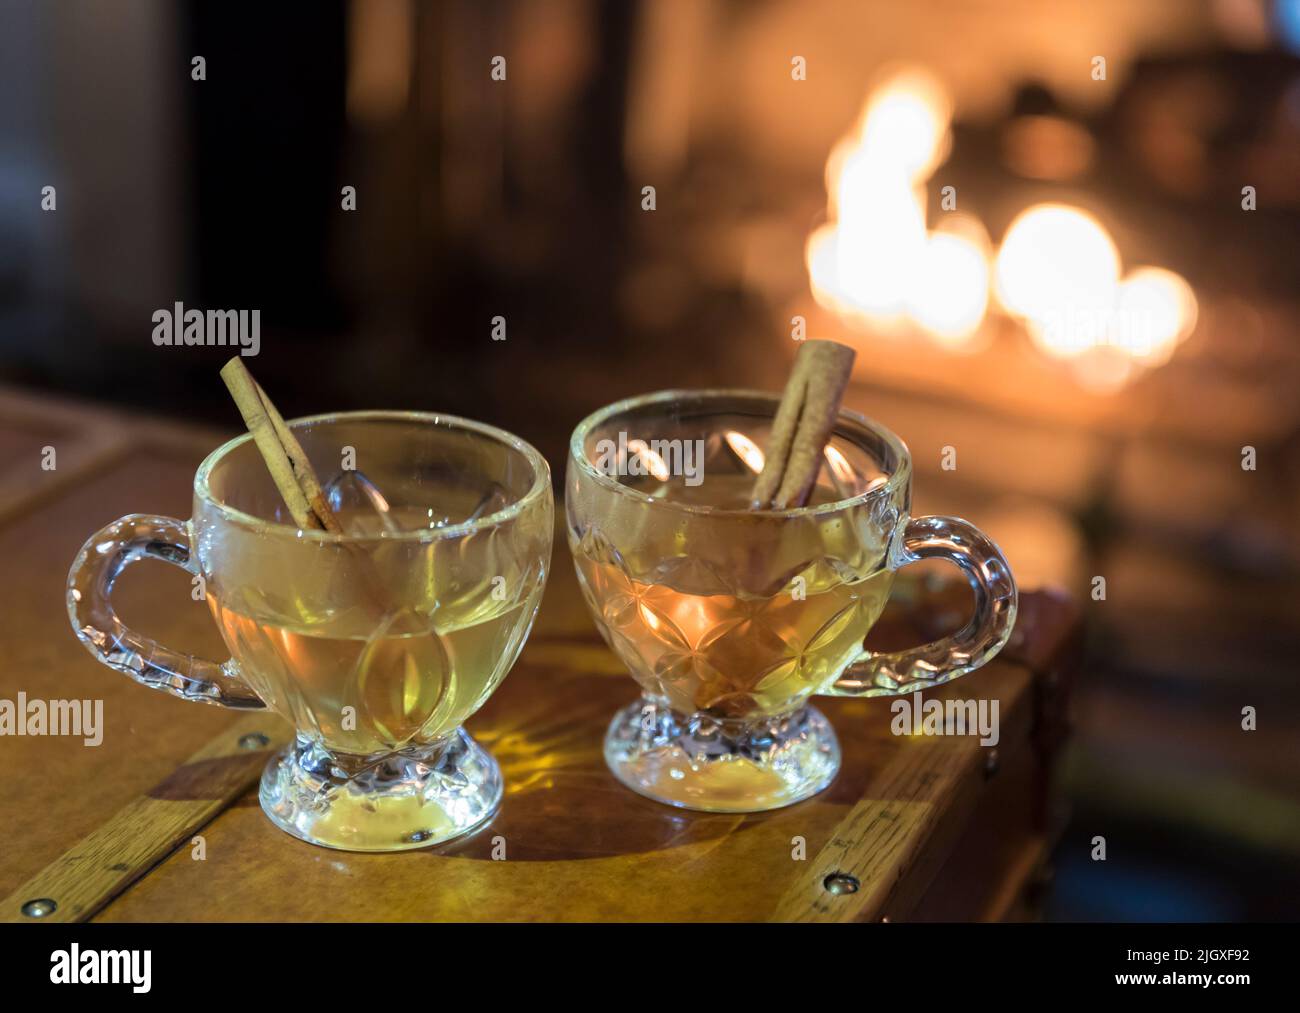 Two glass mugs of hot toddies in front of a fireplace Stock Photo